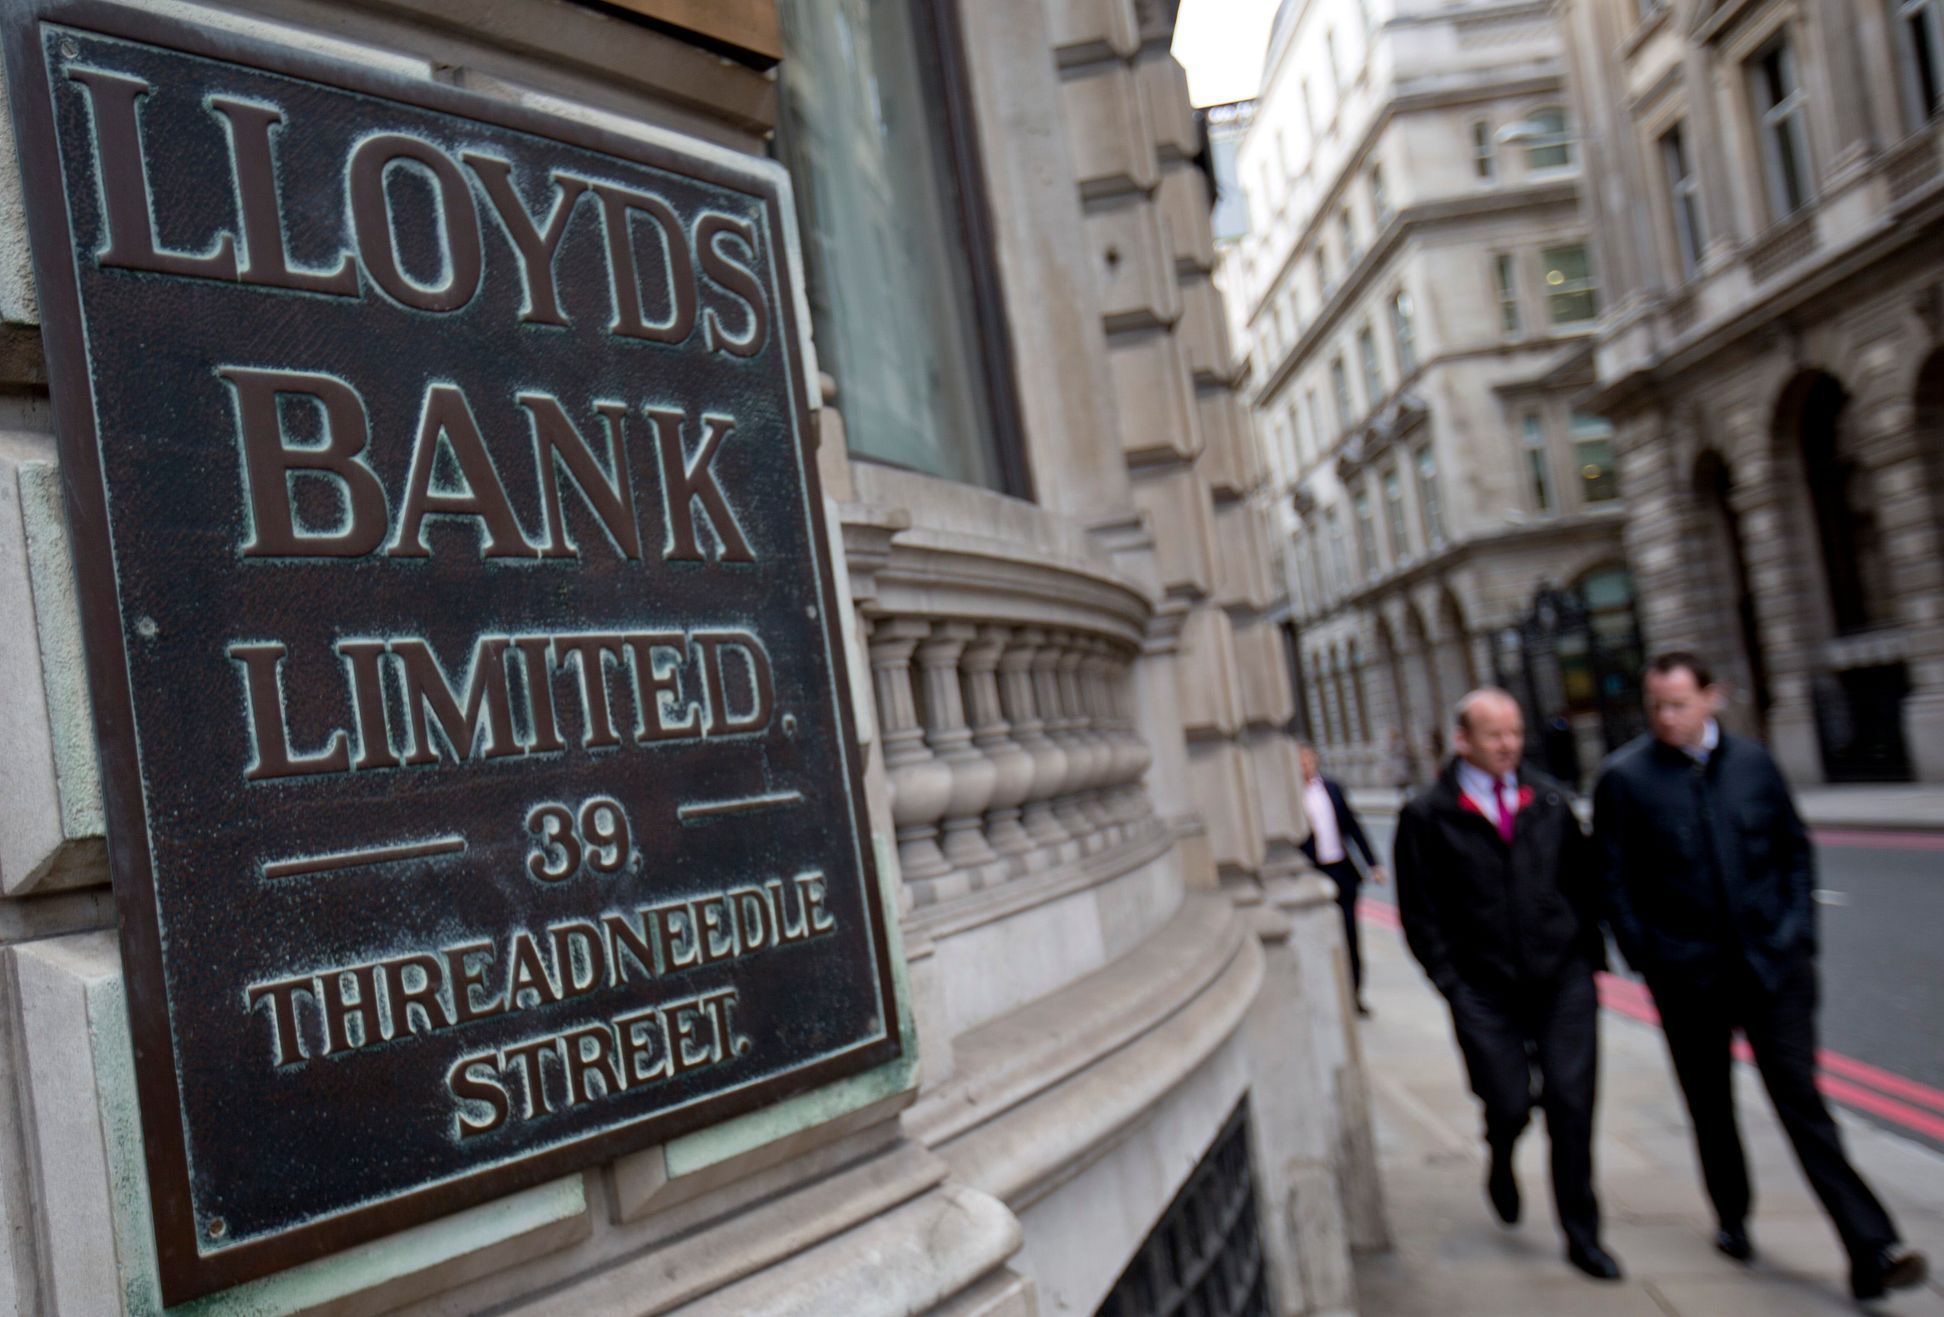 File photograph shows pedestrians walking past a branch of Lloyds Bank in the City London